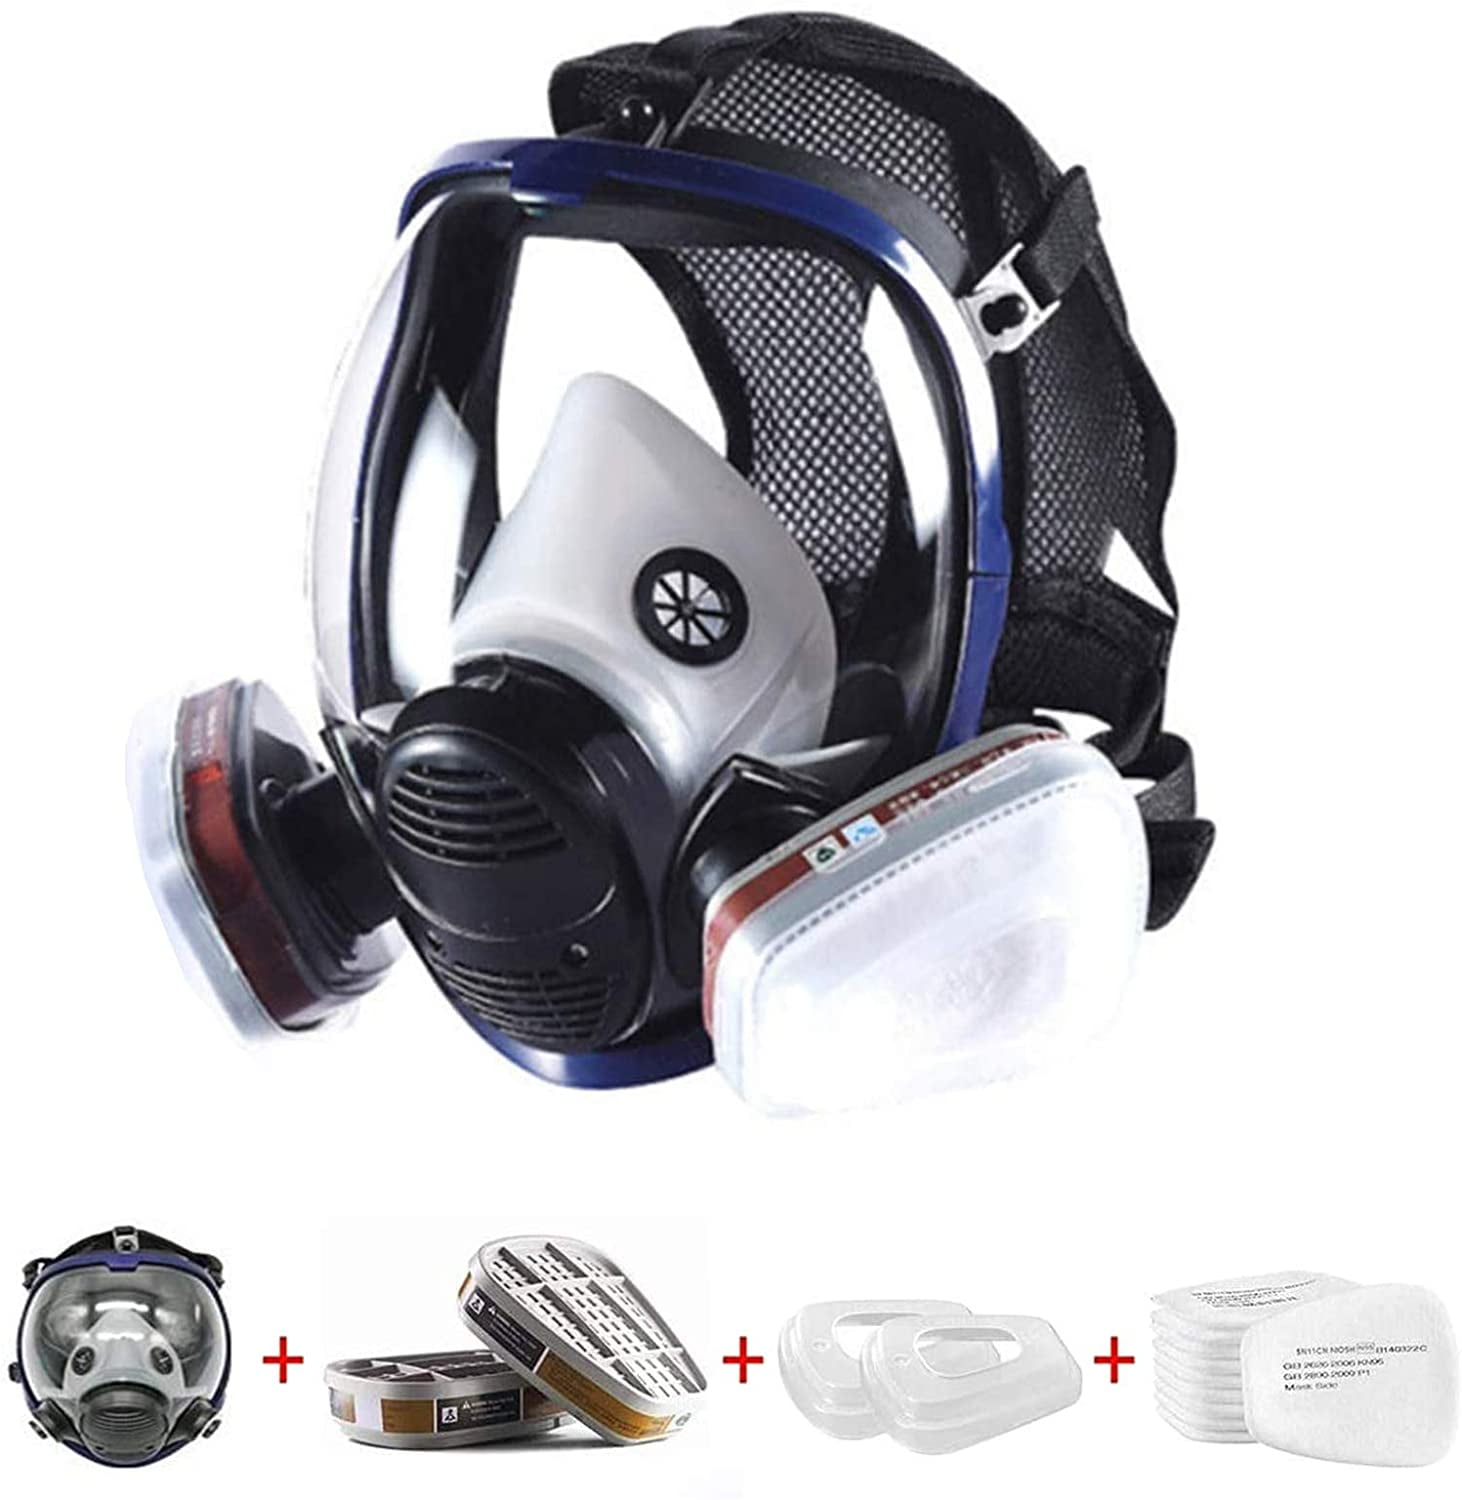 15 in1 Large Full Facepiece Respirator with Wide Field of View Reusable Respirator Widely Used in Organic Gas,Paint Sprayer,Woodworking,Dust Protection 